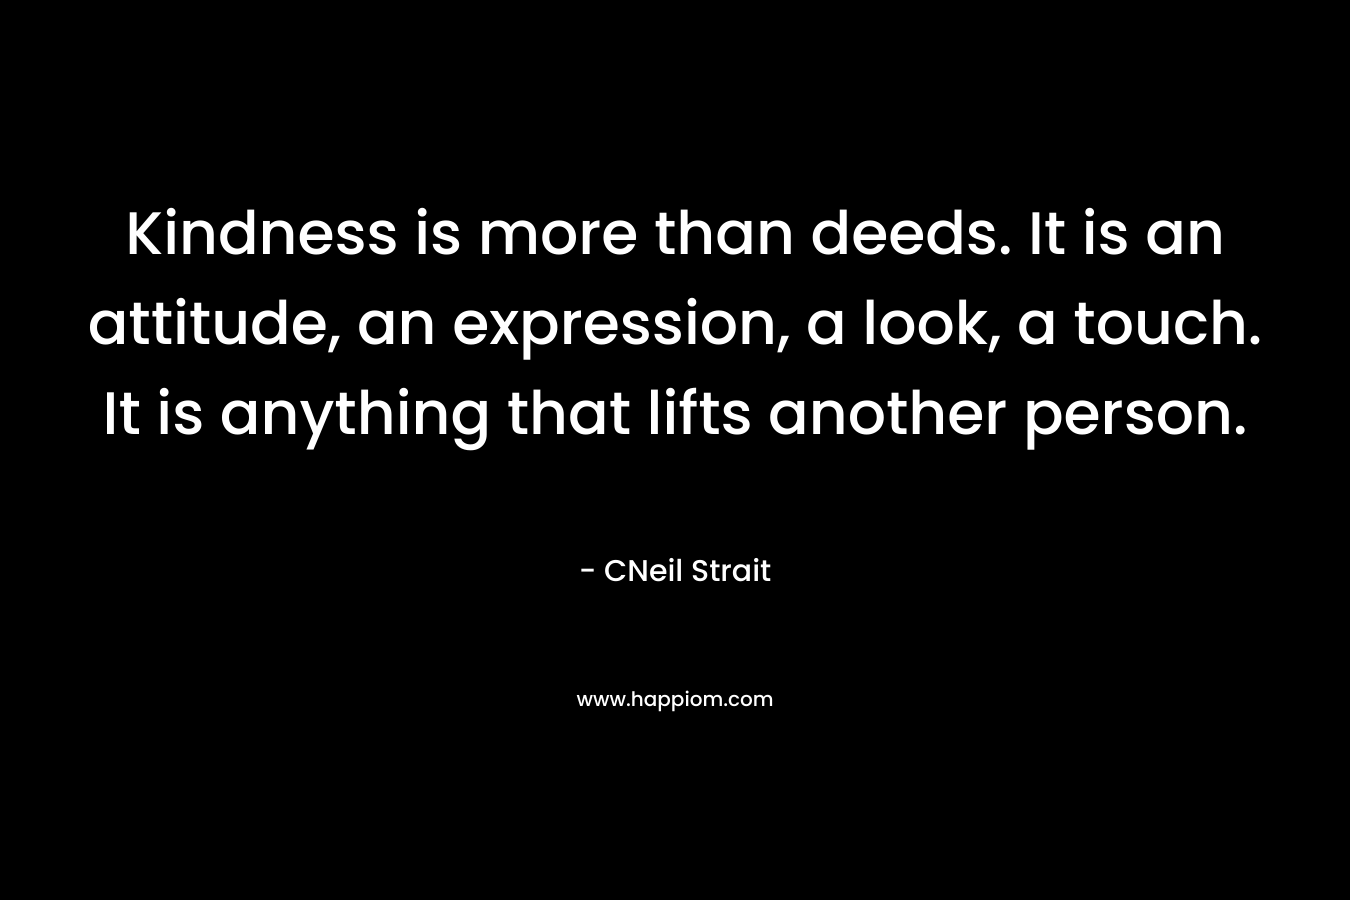 Kindness is more than deeds. It is an attitude, an expression, a look, a touch. It is anything that lifts another person.